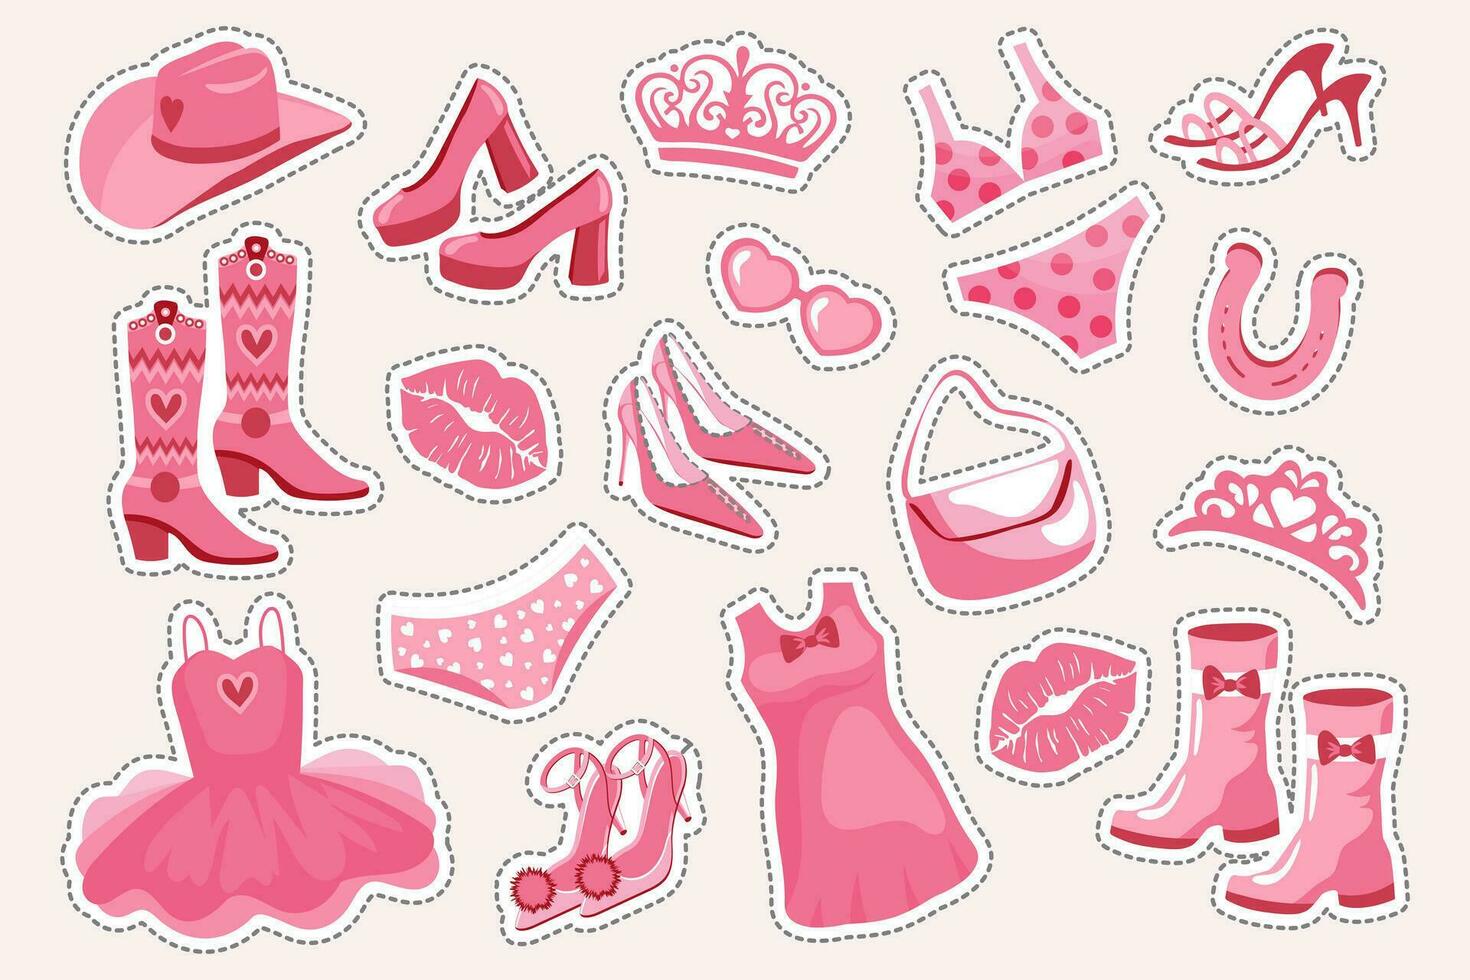 Princess sticker set. Pink fashion set, accessories and clothes for a pink doll. Crown, dress, shoes, cowboy hat, boots, bag, glasses. Vector